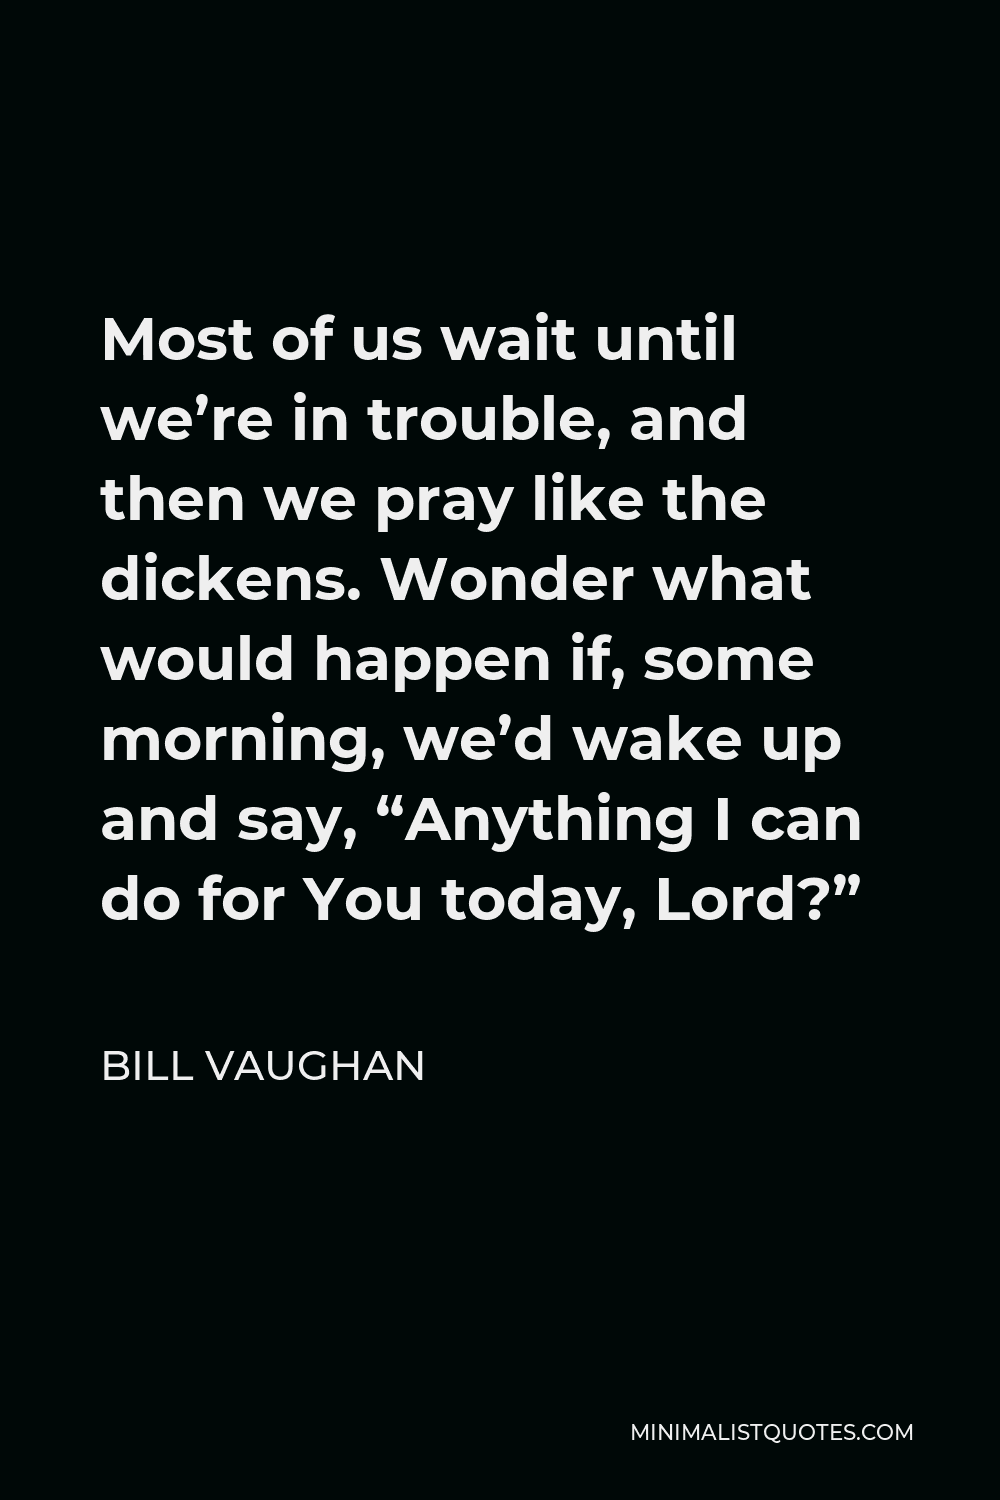 Bill Vaughan Quote - Most of us wait until we’re in trouble, and then we pray like the dickens. Wonder what would happen if, some morning, we’d wake up and say, “Anything I can do for You today, Lord?”